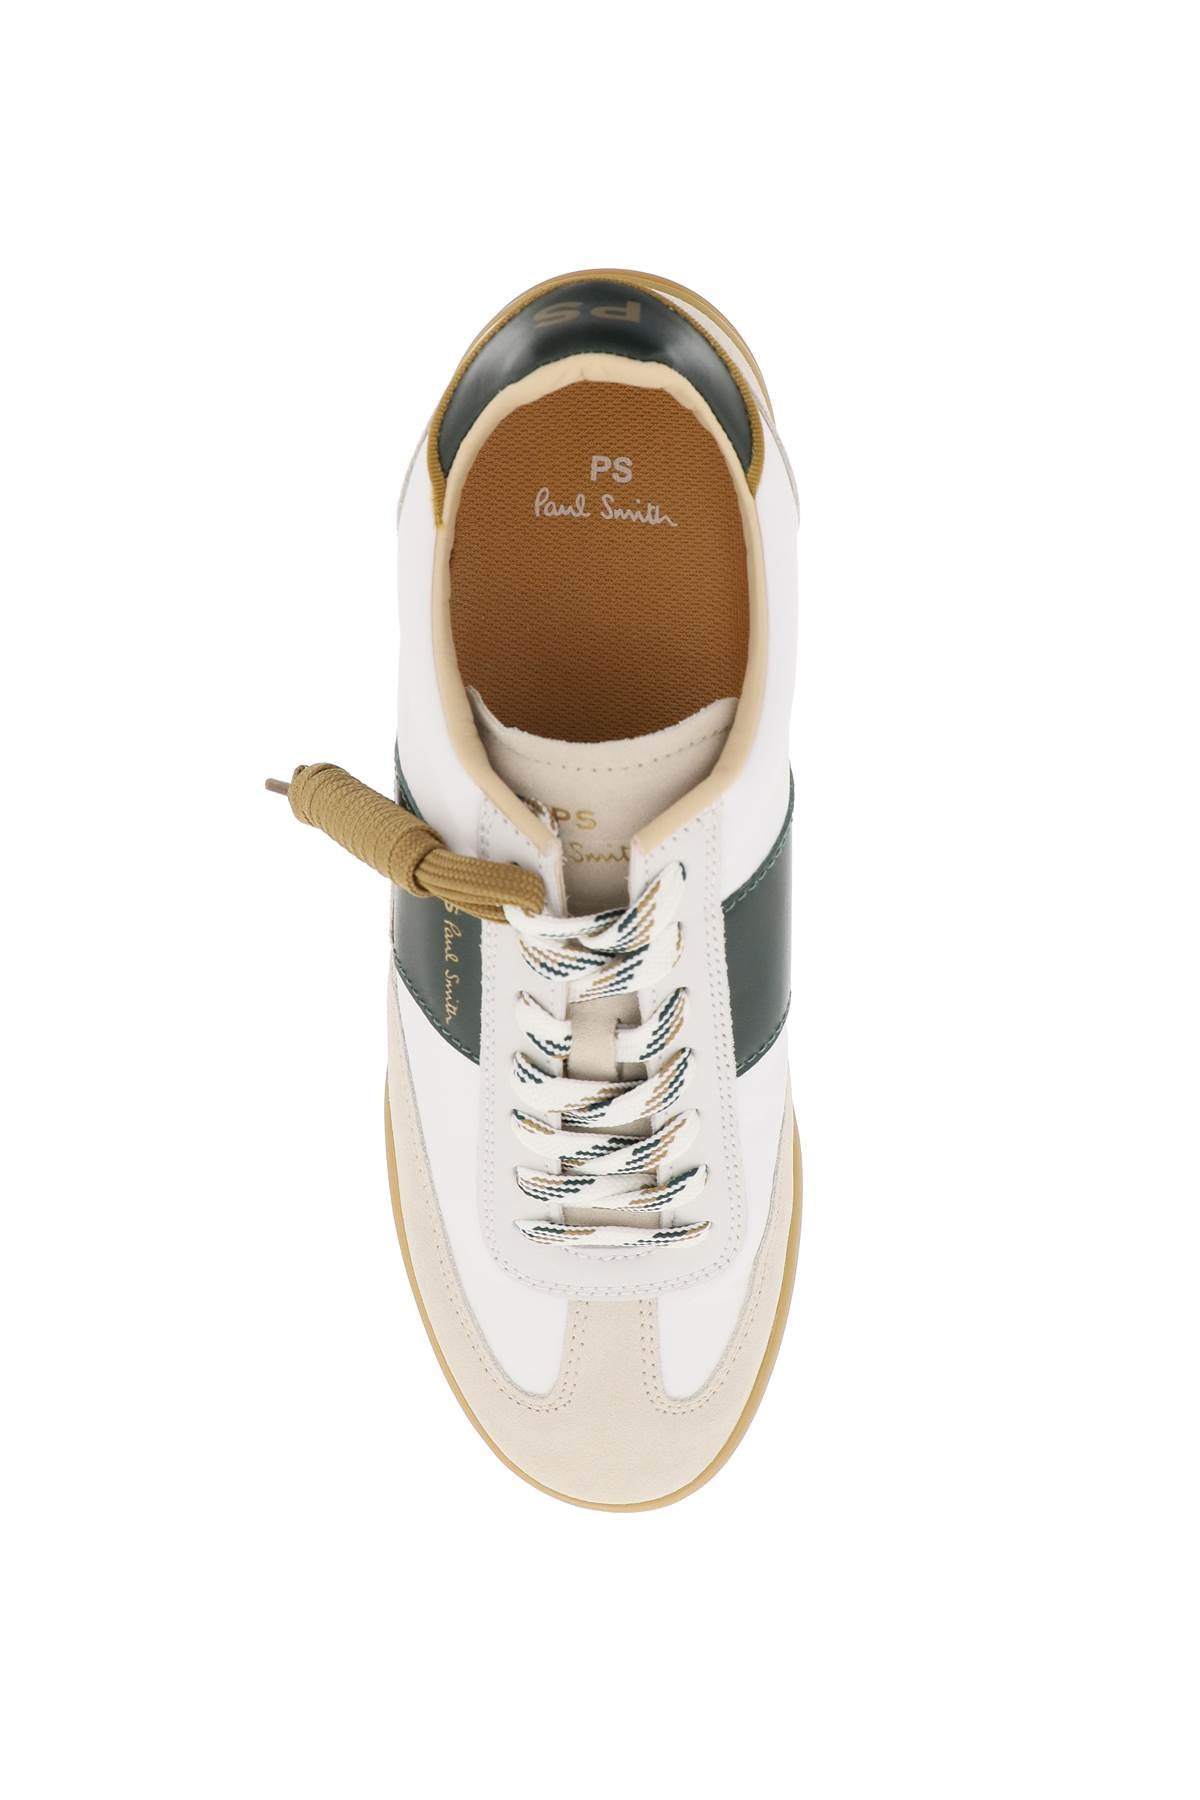 Ps paul smith leather and nylon dover sneakers in-1